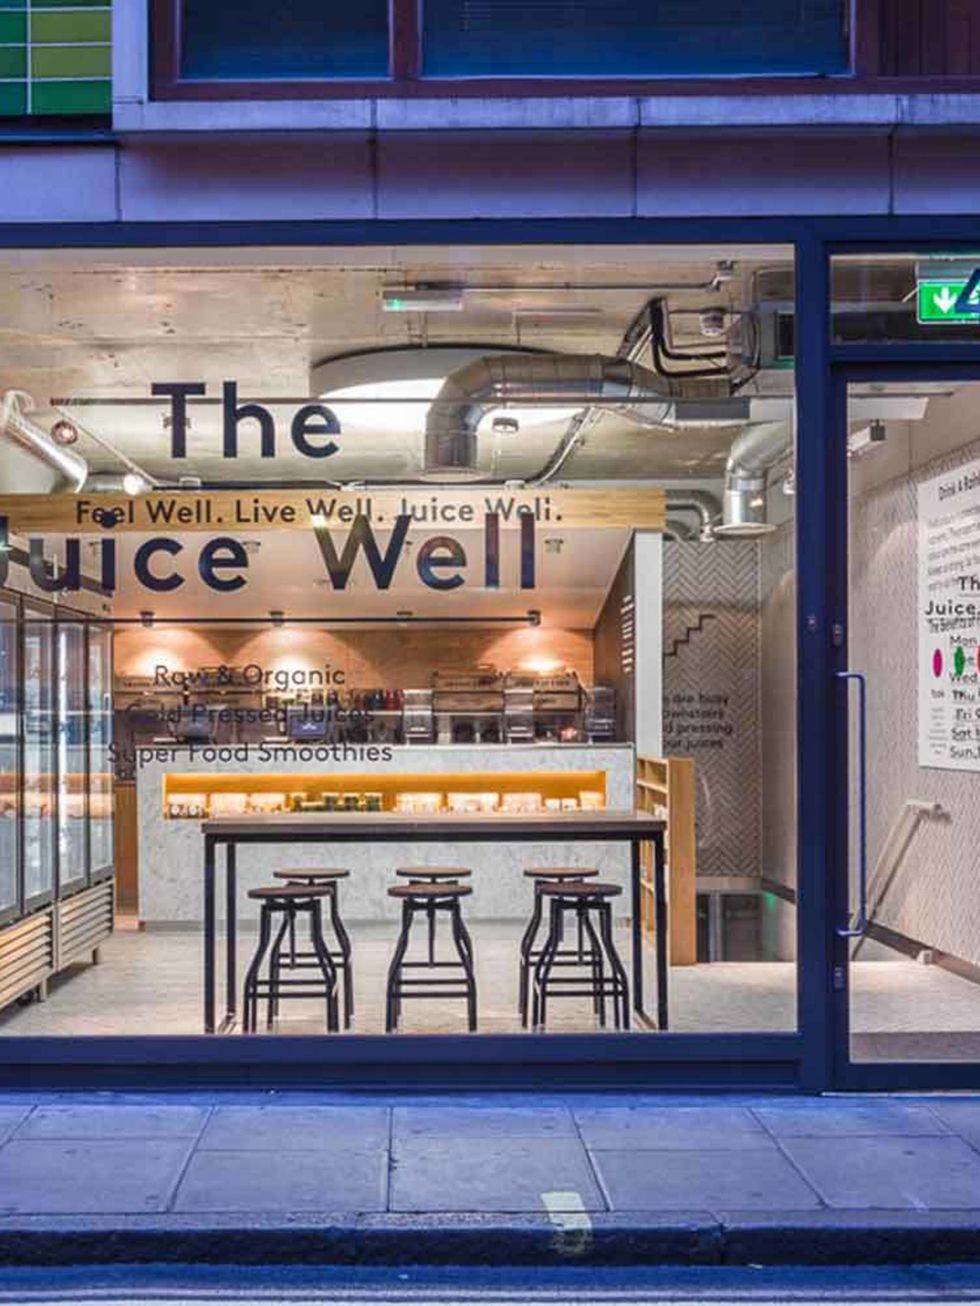 <p><a href="http://www.thejuicewell.hk/" target="_blank">The Juice Well</a></p>

<p>What? Founded by Joe Cross star of documentary Sick, Fat and Nearly Dead.</p>

<p>Why visit? The Juice Well boasts unusual concoctions like Hunger Buster, £5 with chia g